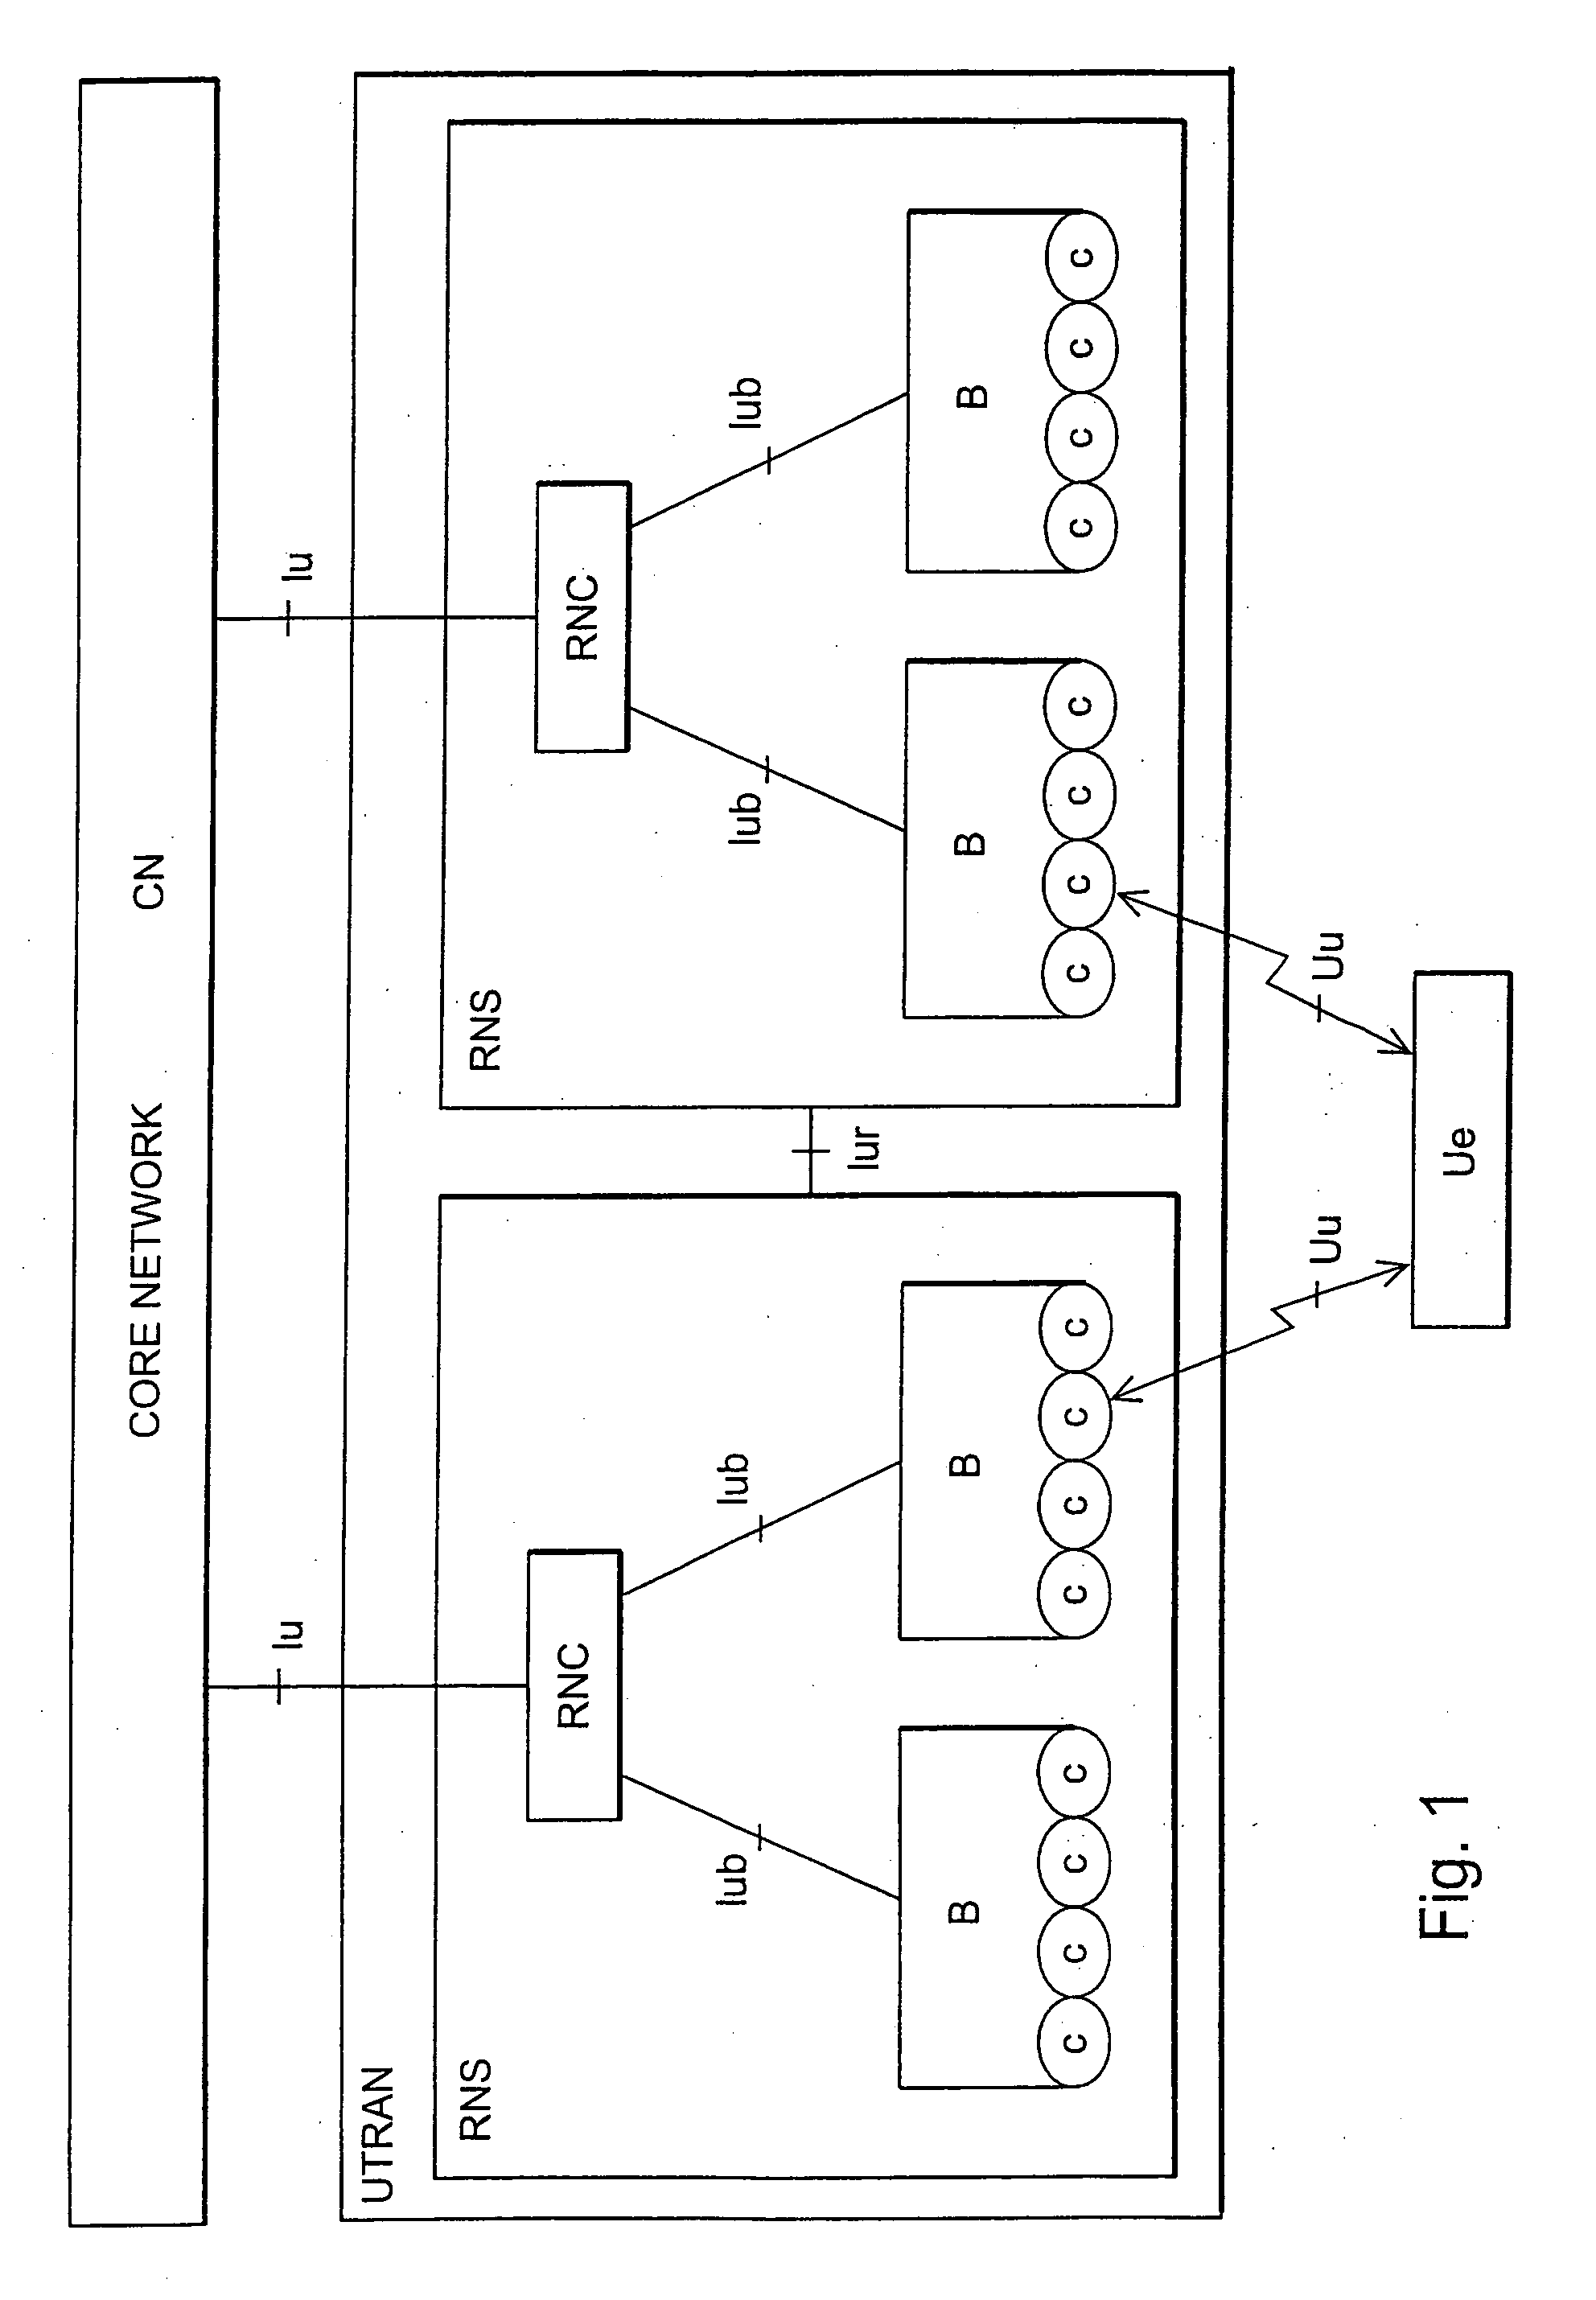 Interference cancellation method and receiver